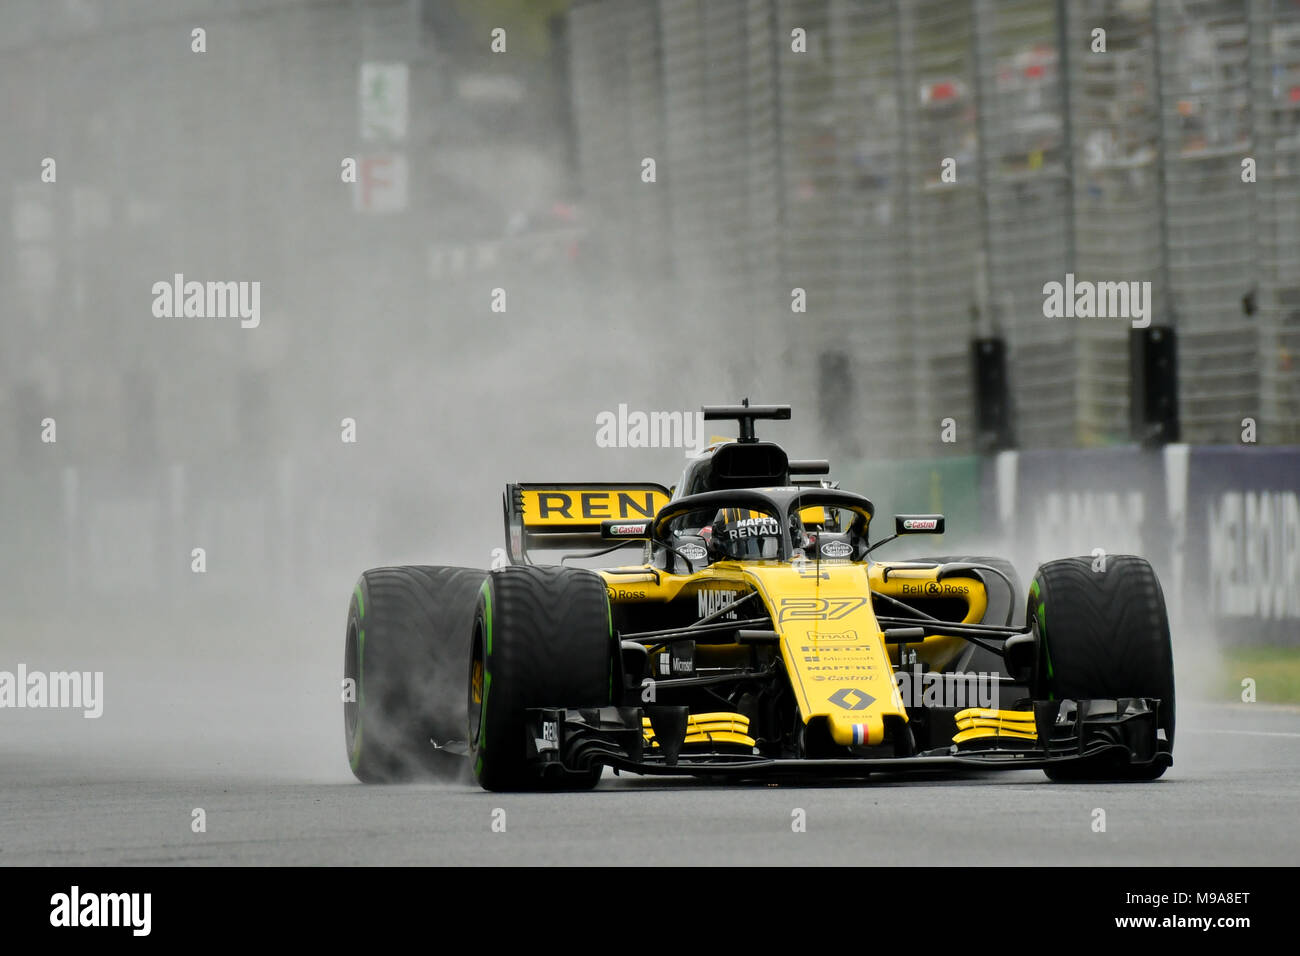 Albert Park, Melbourne, Australia. 24th Mar, 2018. Nico Hulkenberg (DEU) #27 from the Renault Sport F1 team creates a rooster tail down the main straight during practice session three at the 2018 Australian Formula One Grand Prix at Albert Park, Melbourne, Australia. Sydney Low/Cal Sport Media/Alamy Live News Stock Photo